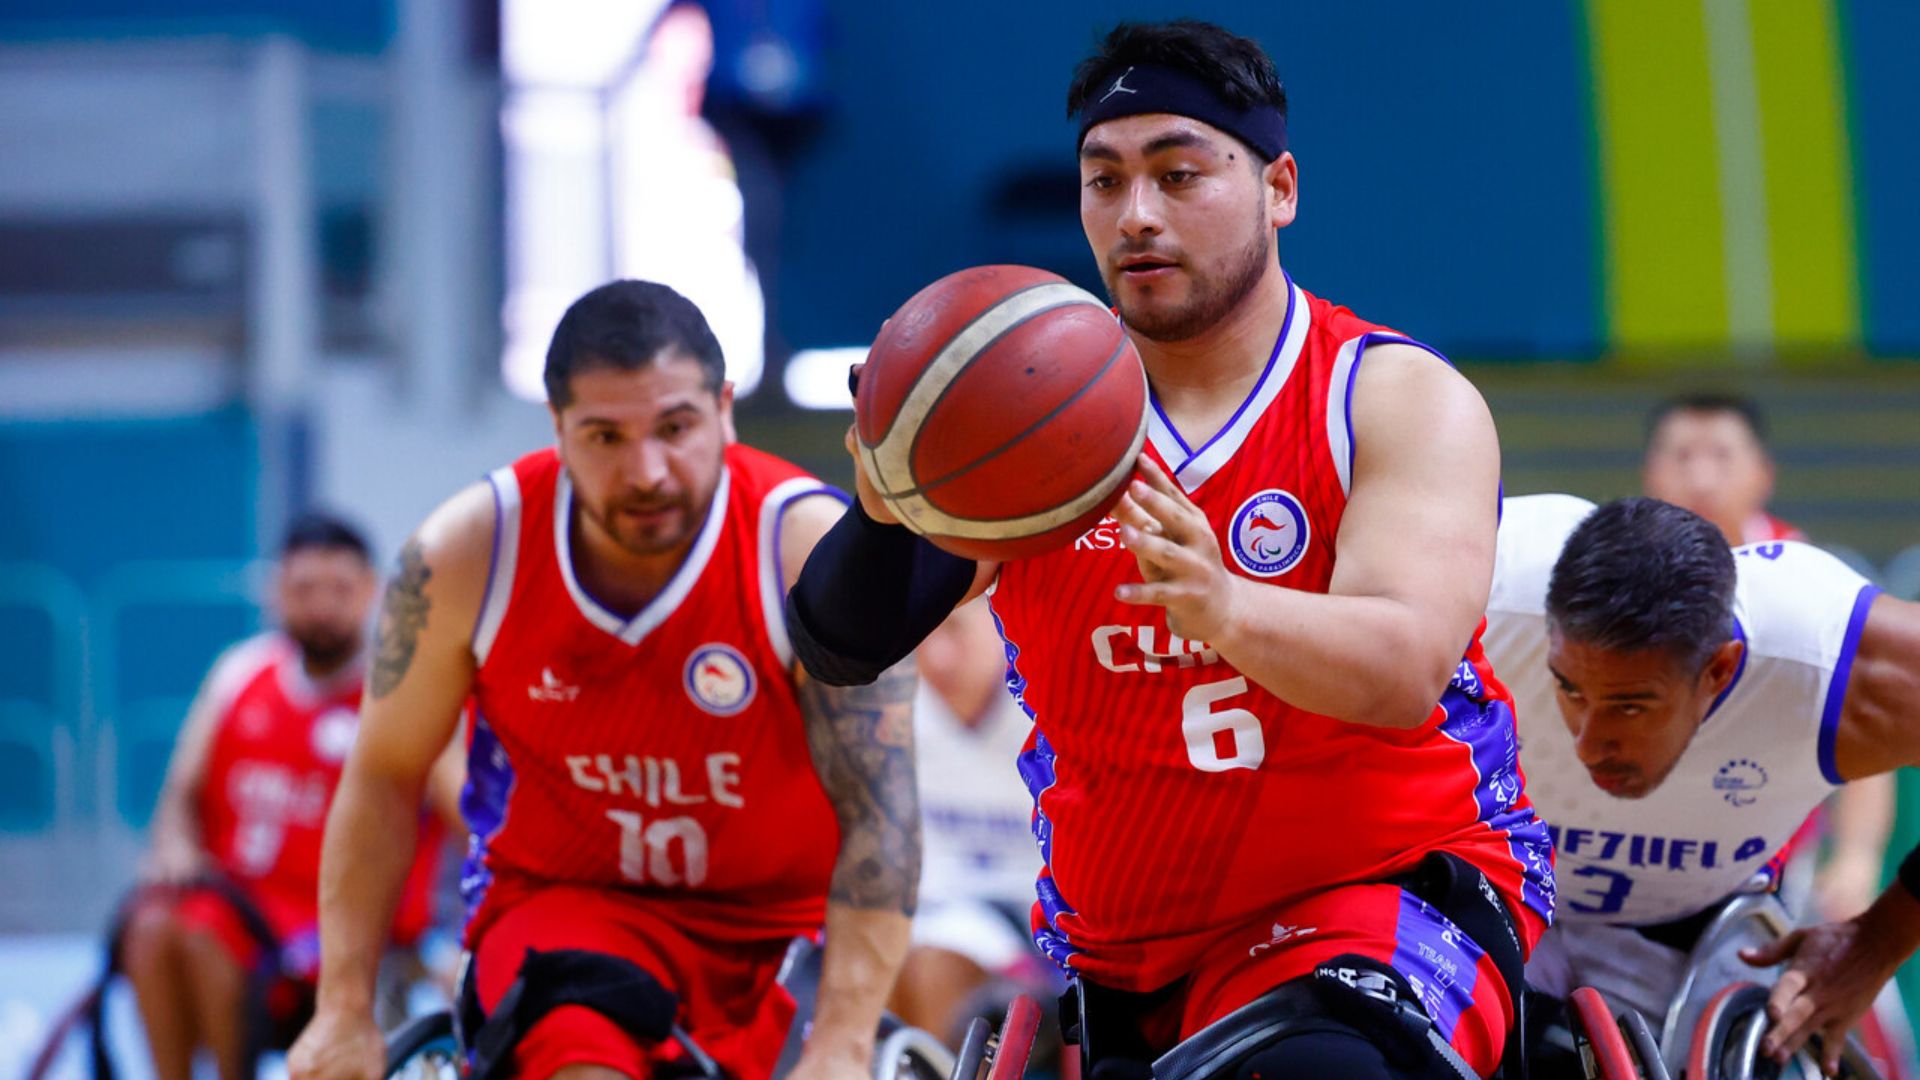 Wheelchair Basketball: Venezuela Secures Its First Victory Against Chile